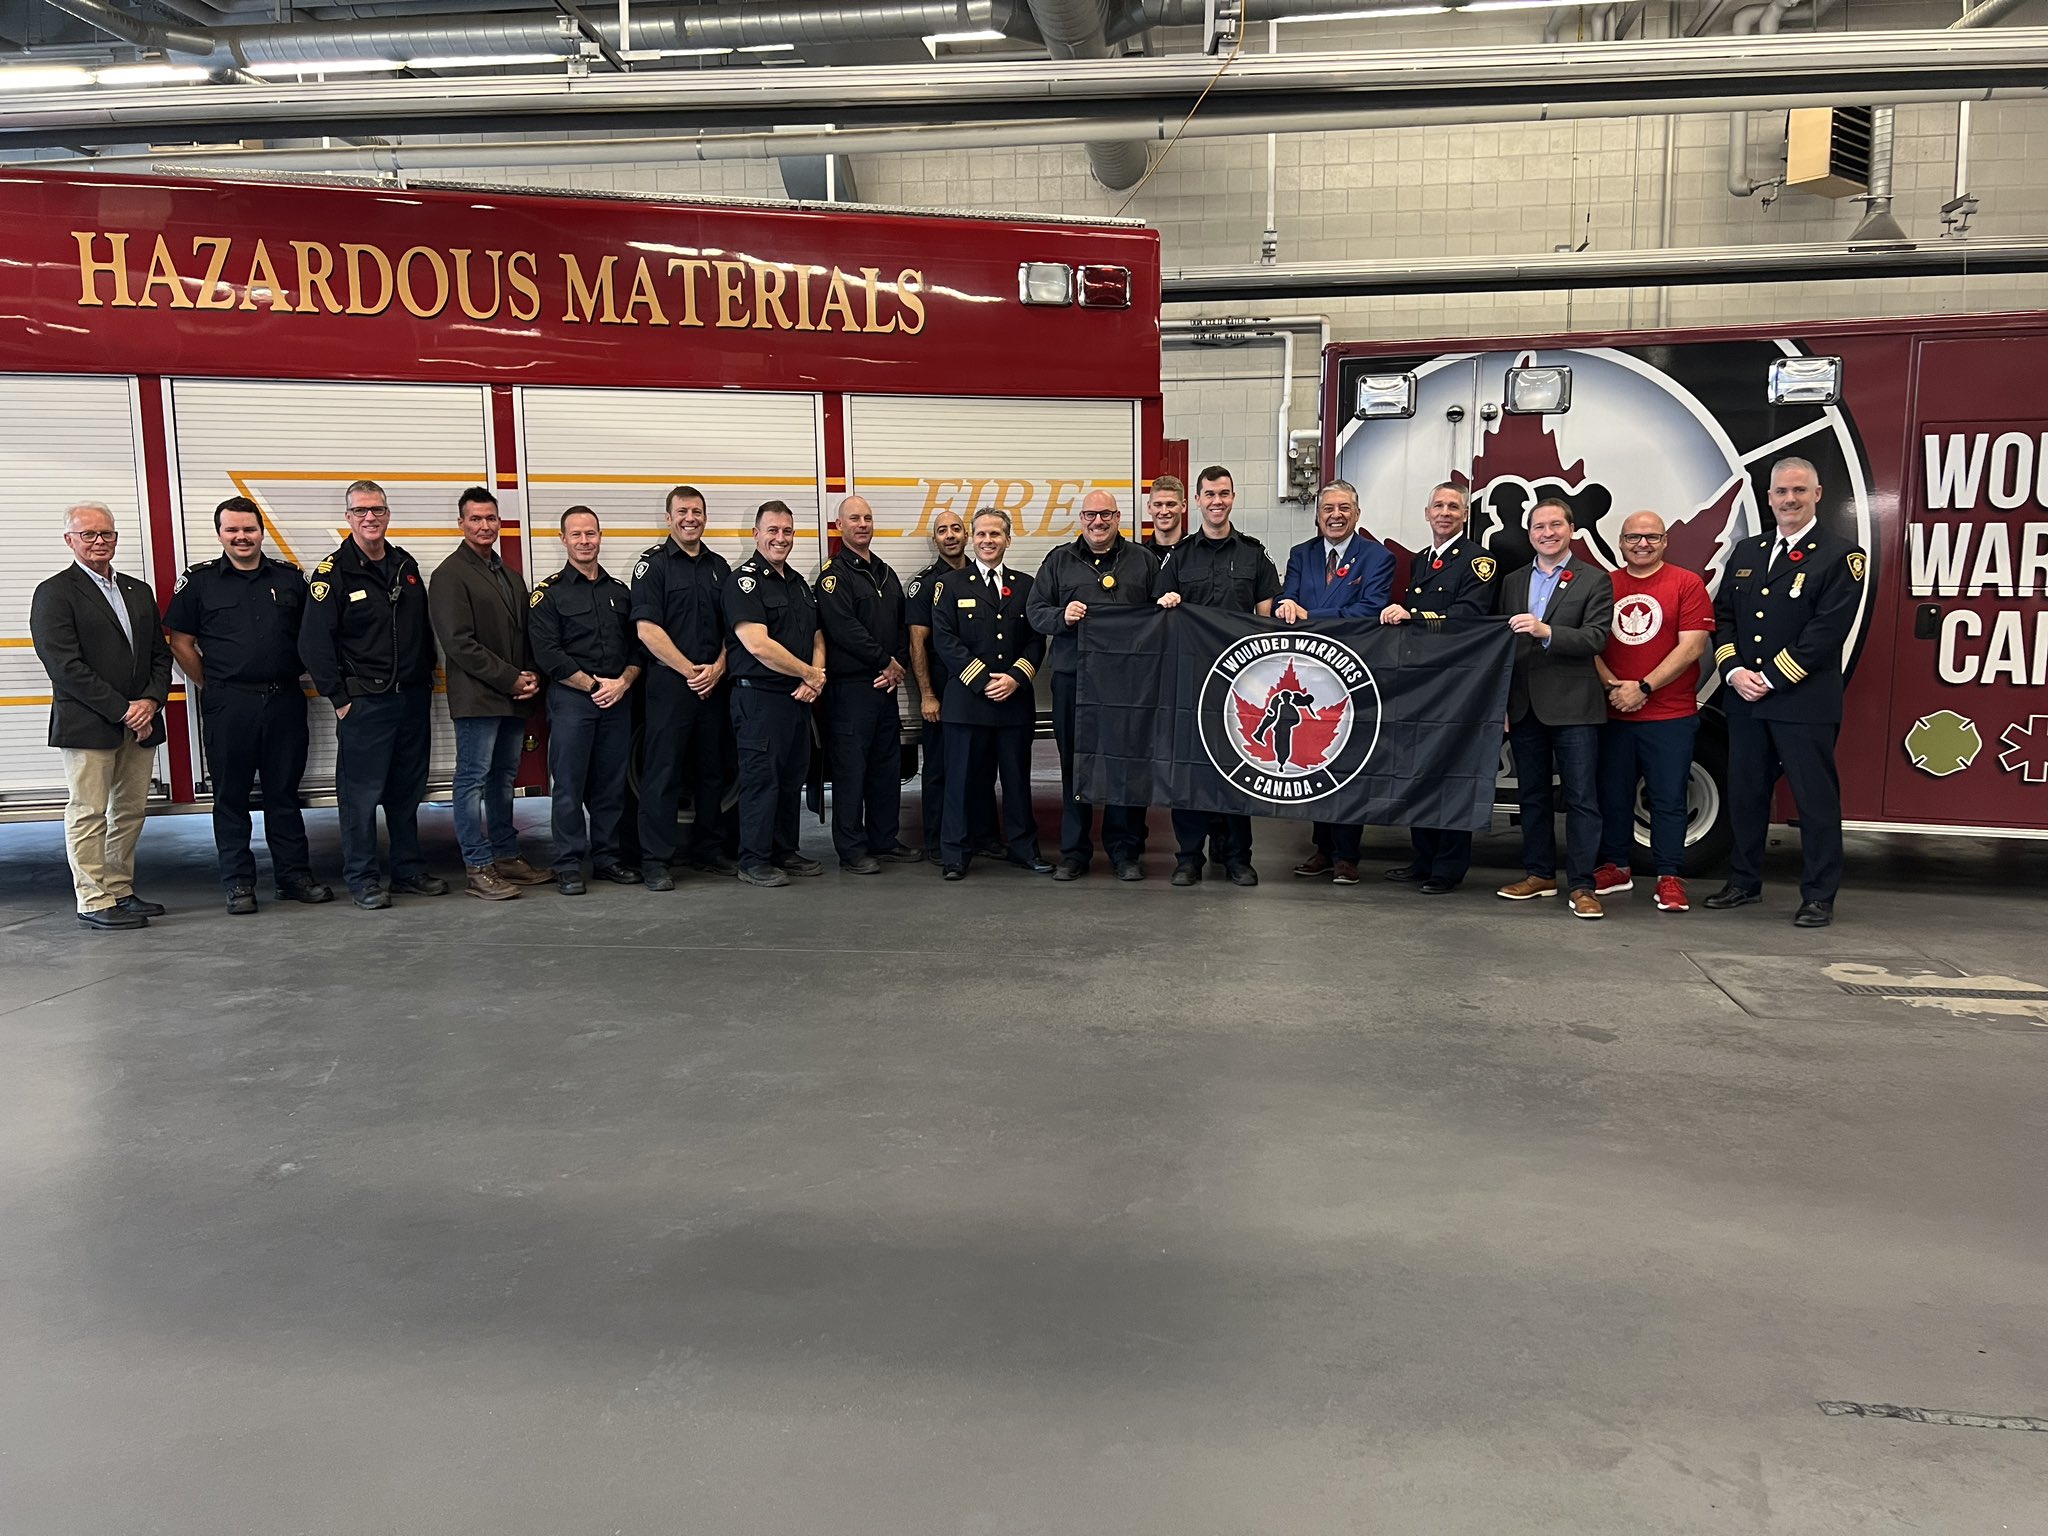 London Fire Department partners with Wounded Warriors Canada for mental health supports